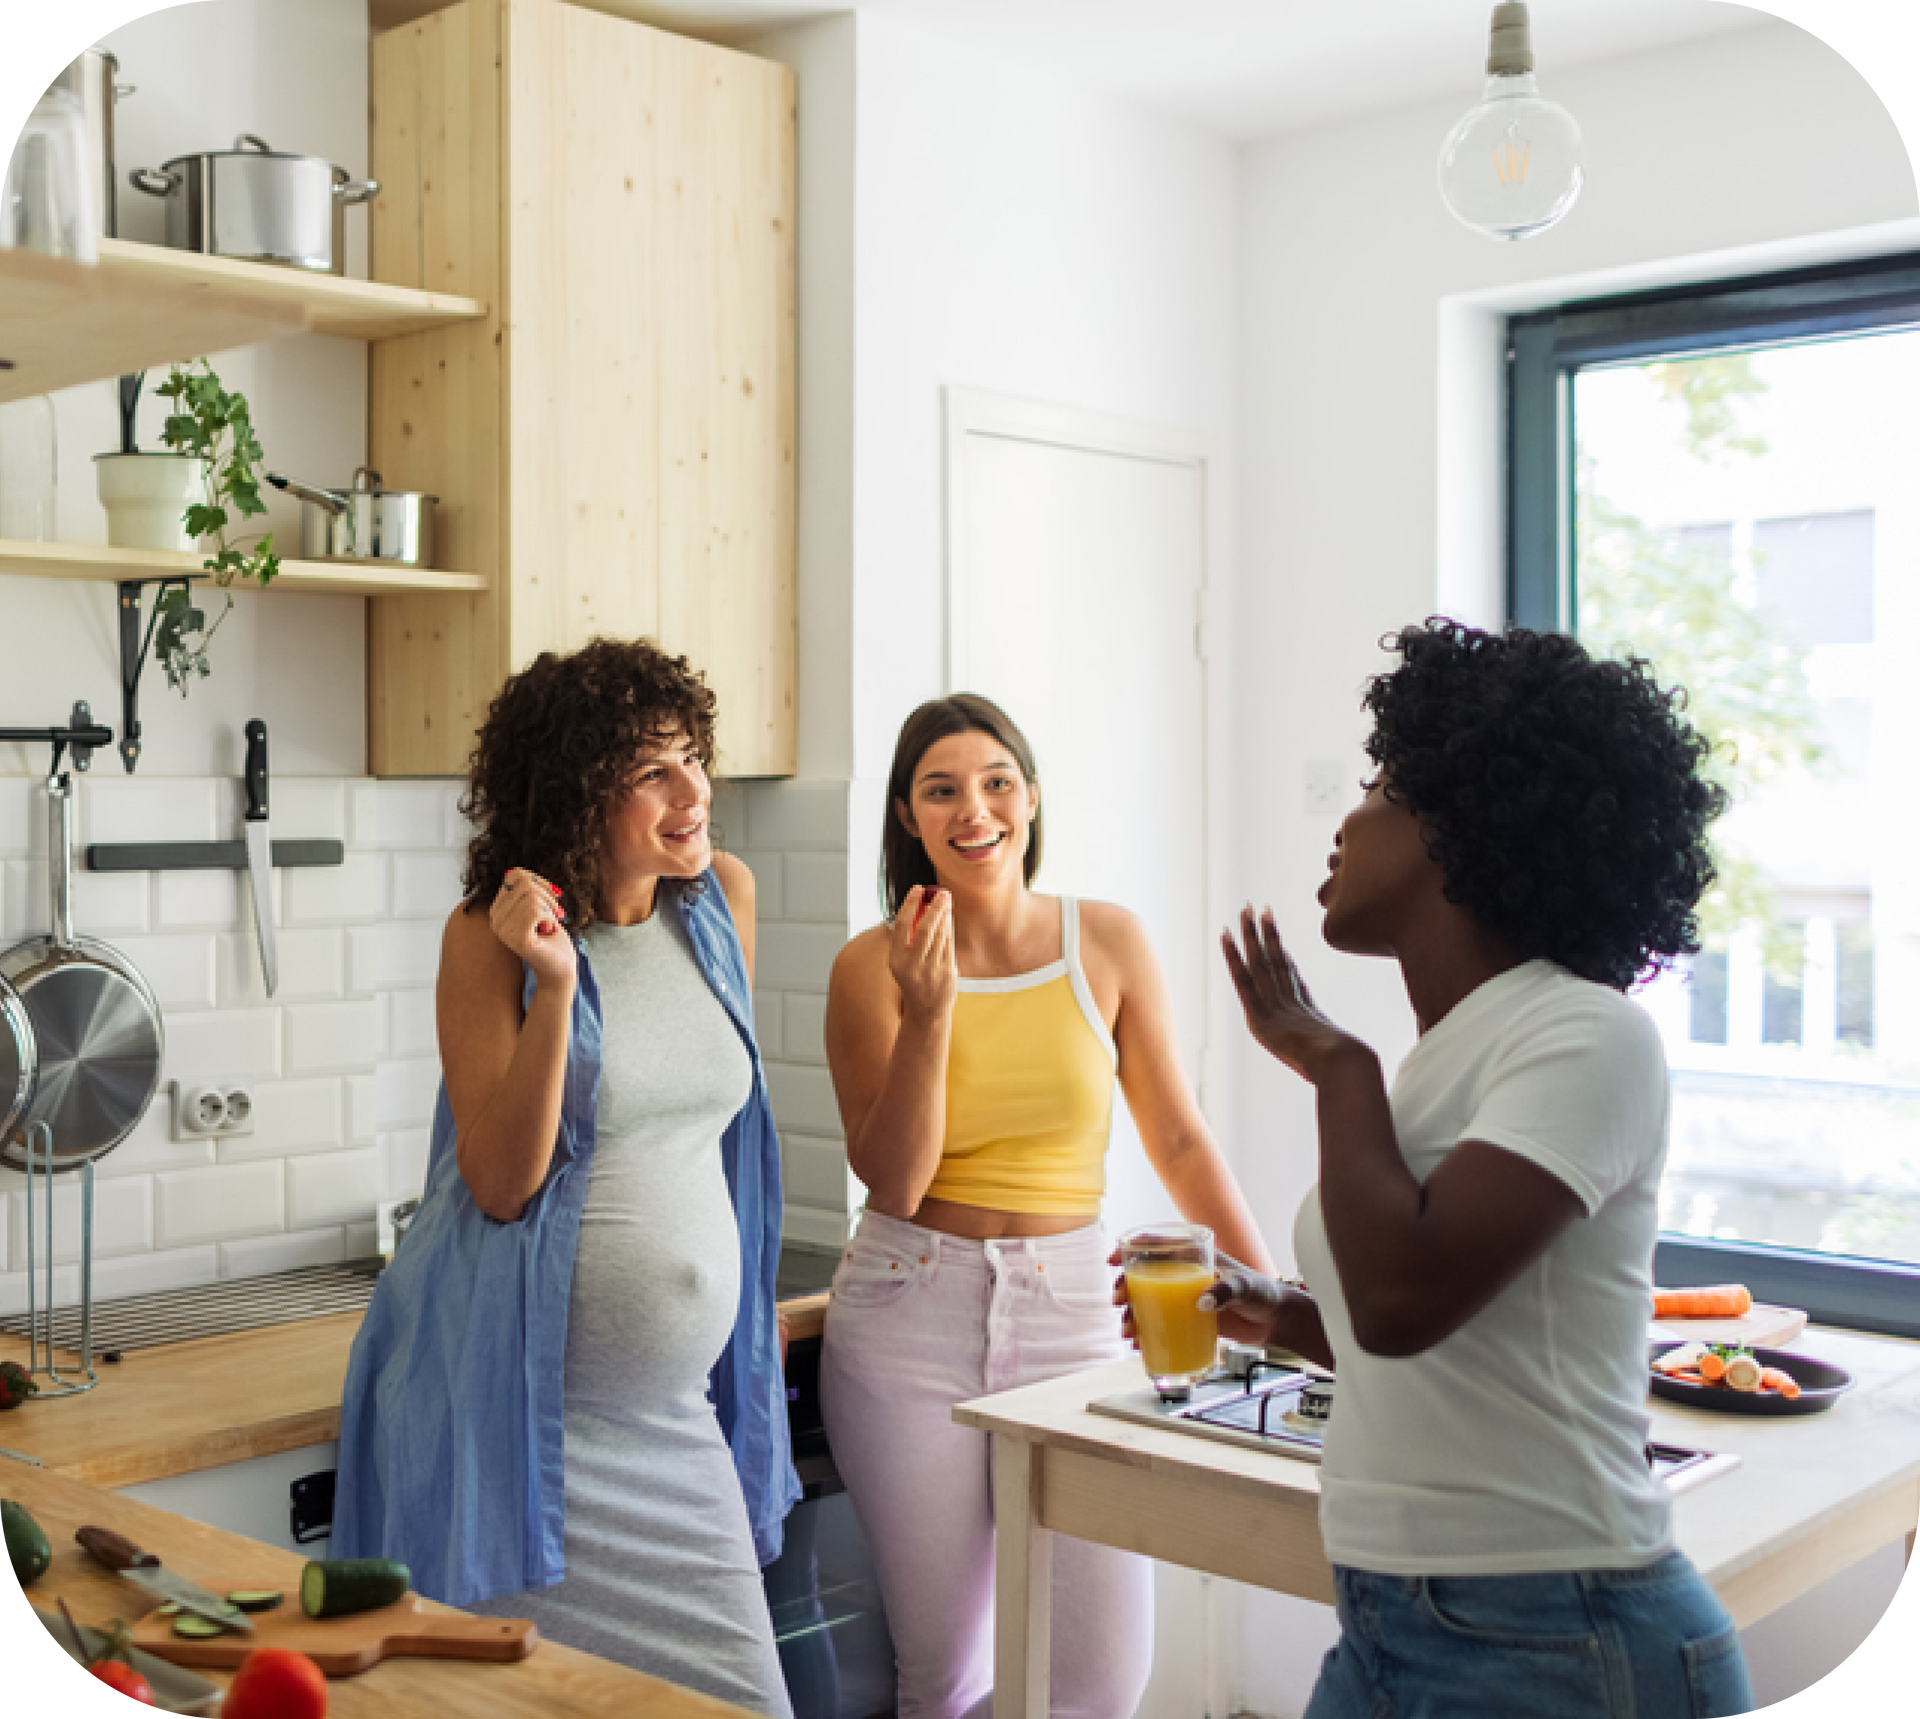 Three women are standing in a kitchen talking to each other.